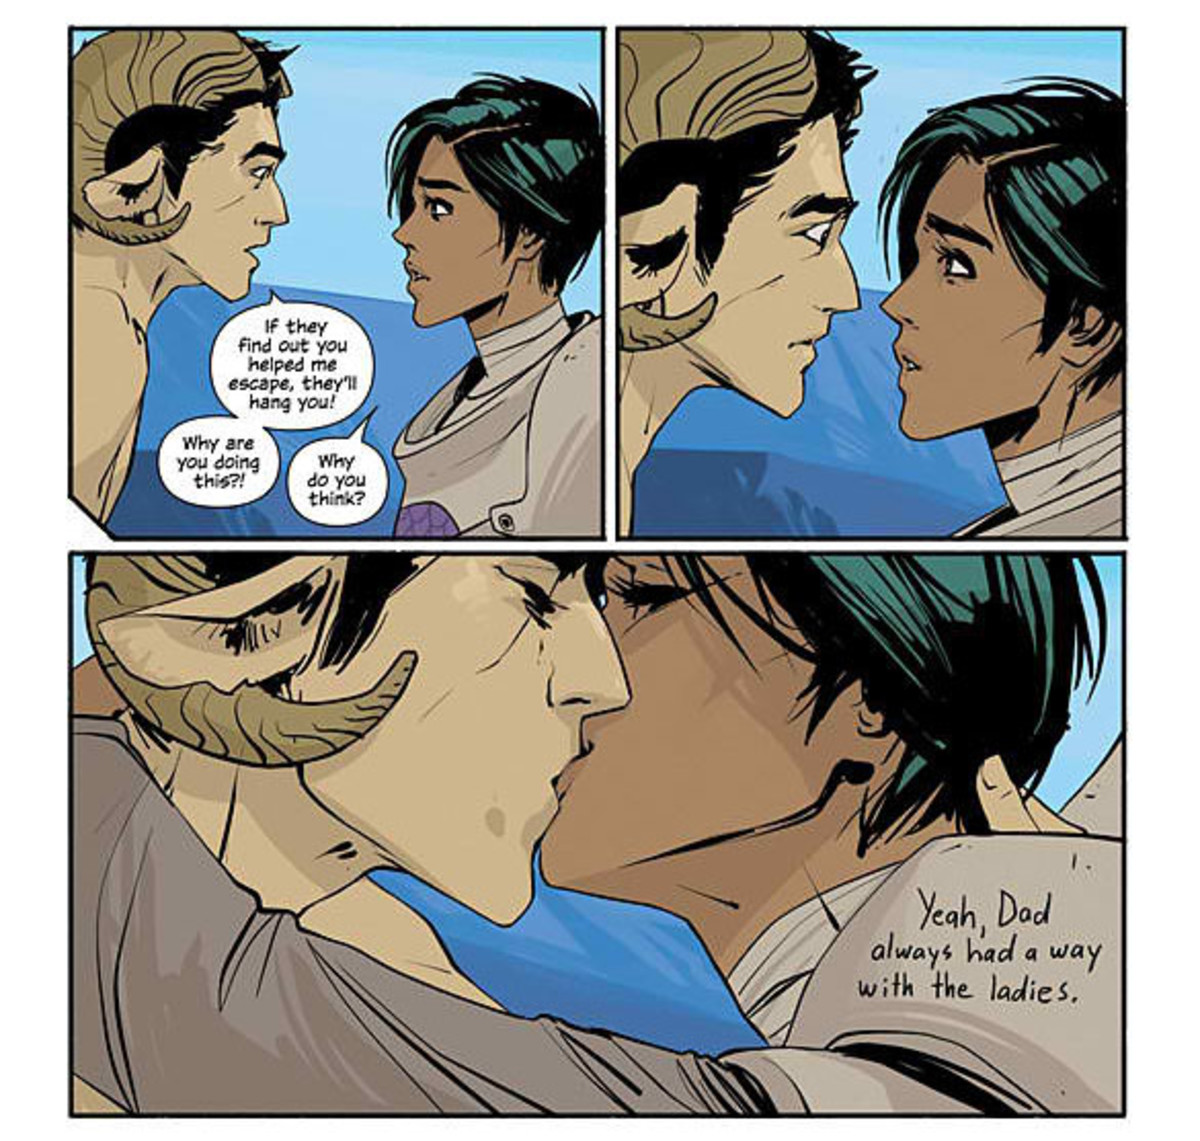 Marko and Alana are star-crossed lovers who crossed the line in Saga.